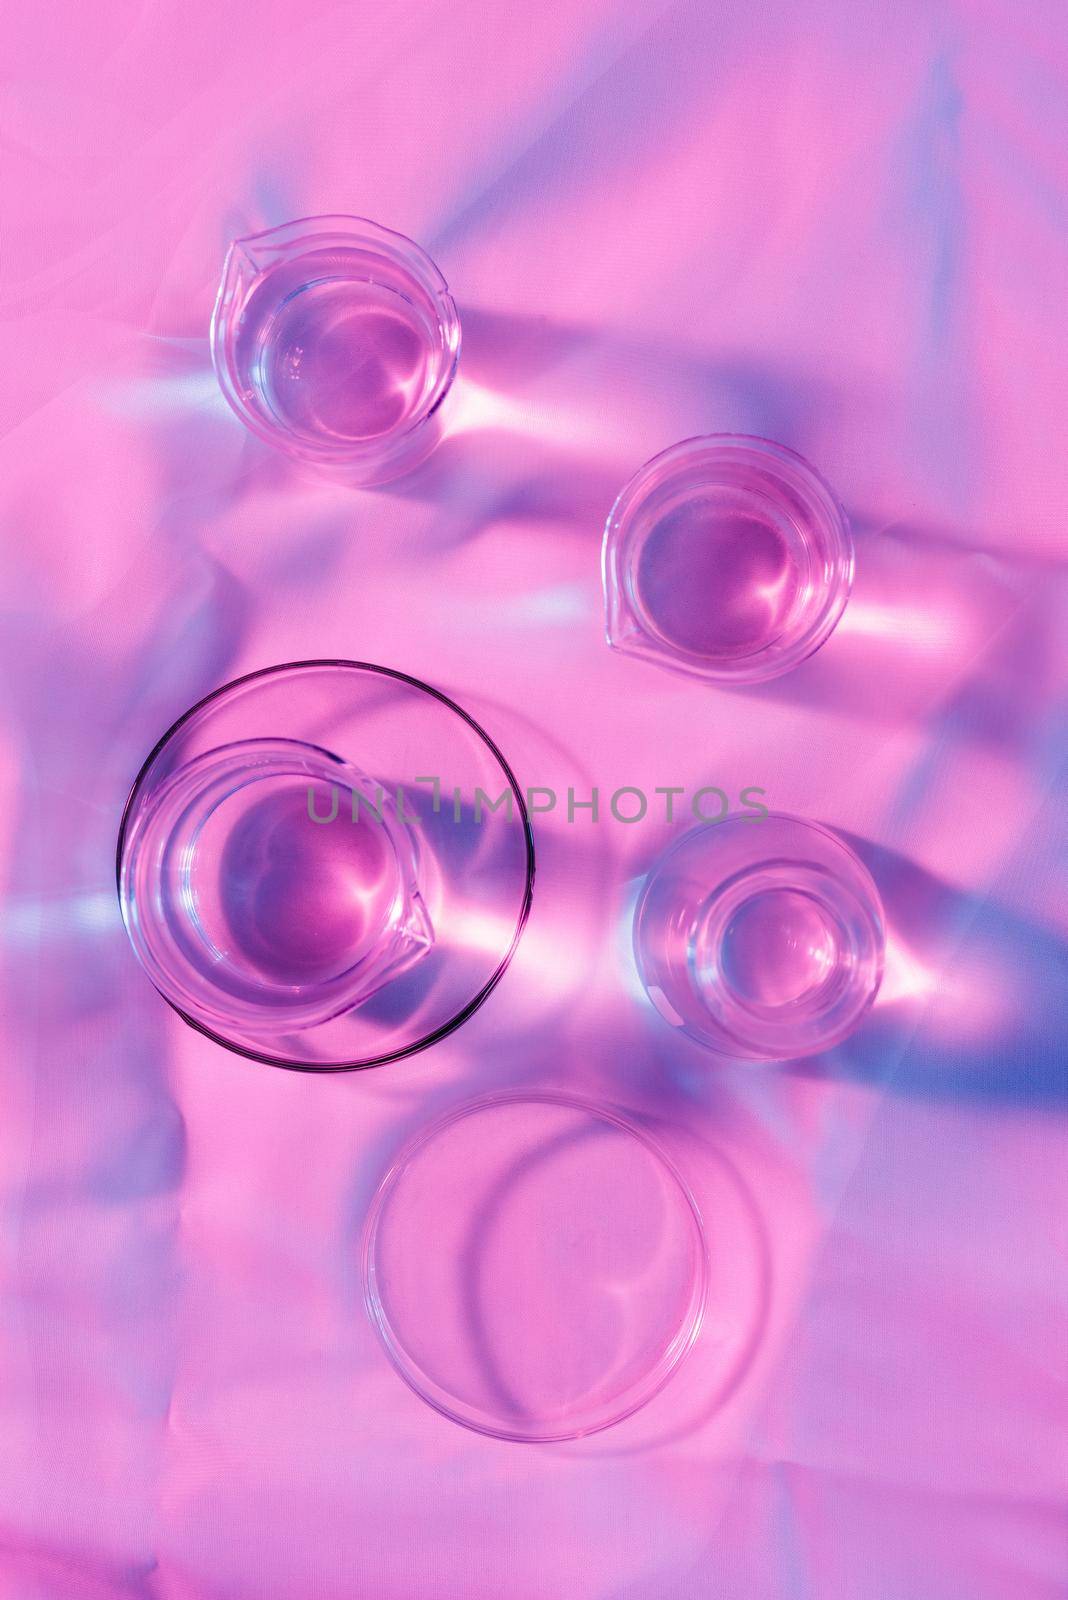 Scientific Glassware For Chemical, Laboratory Research by makidotvn